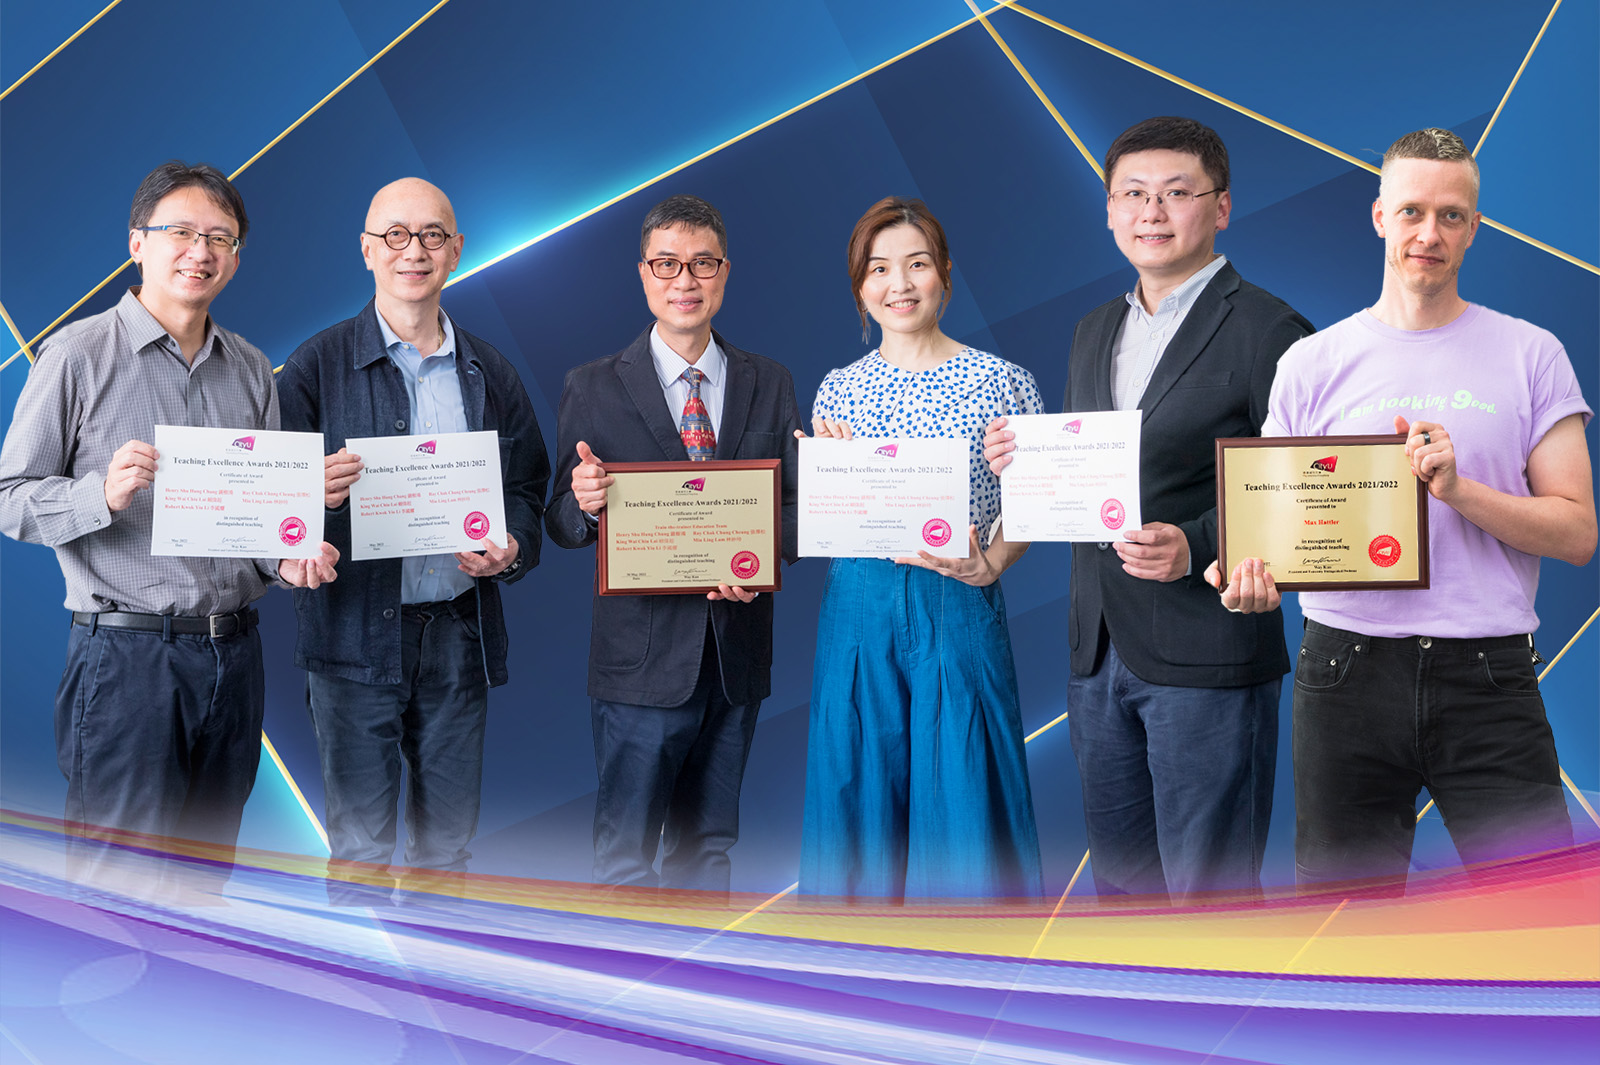 Six faculty members have received Teaching Excellence Awards for their contributions to raising the quality of teaching at CityU. 